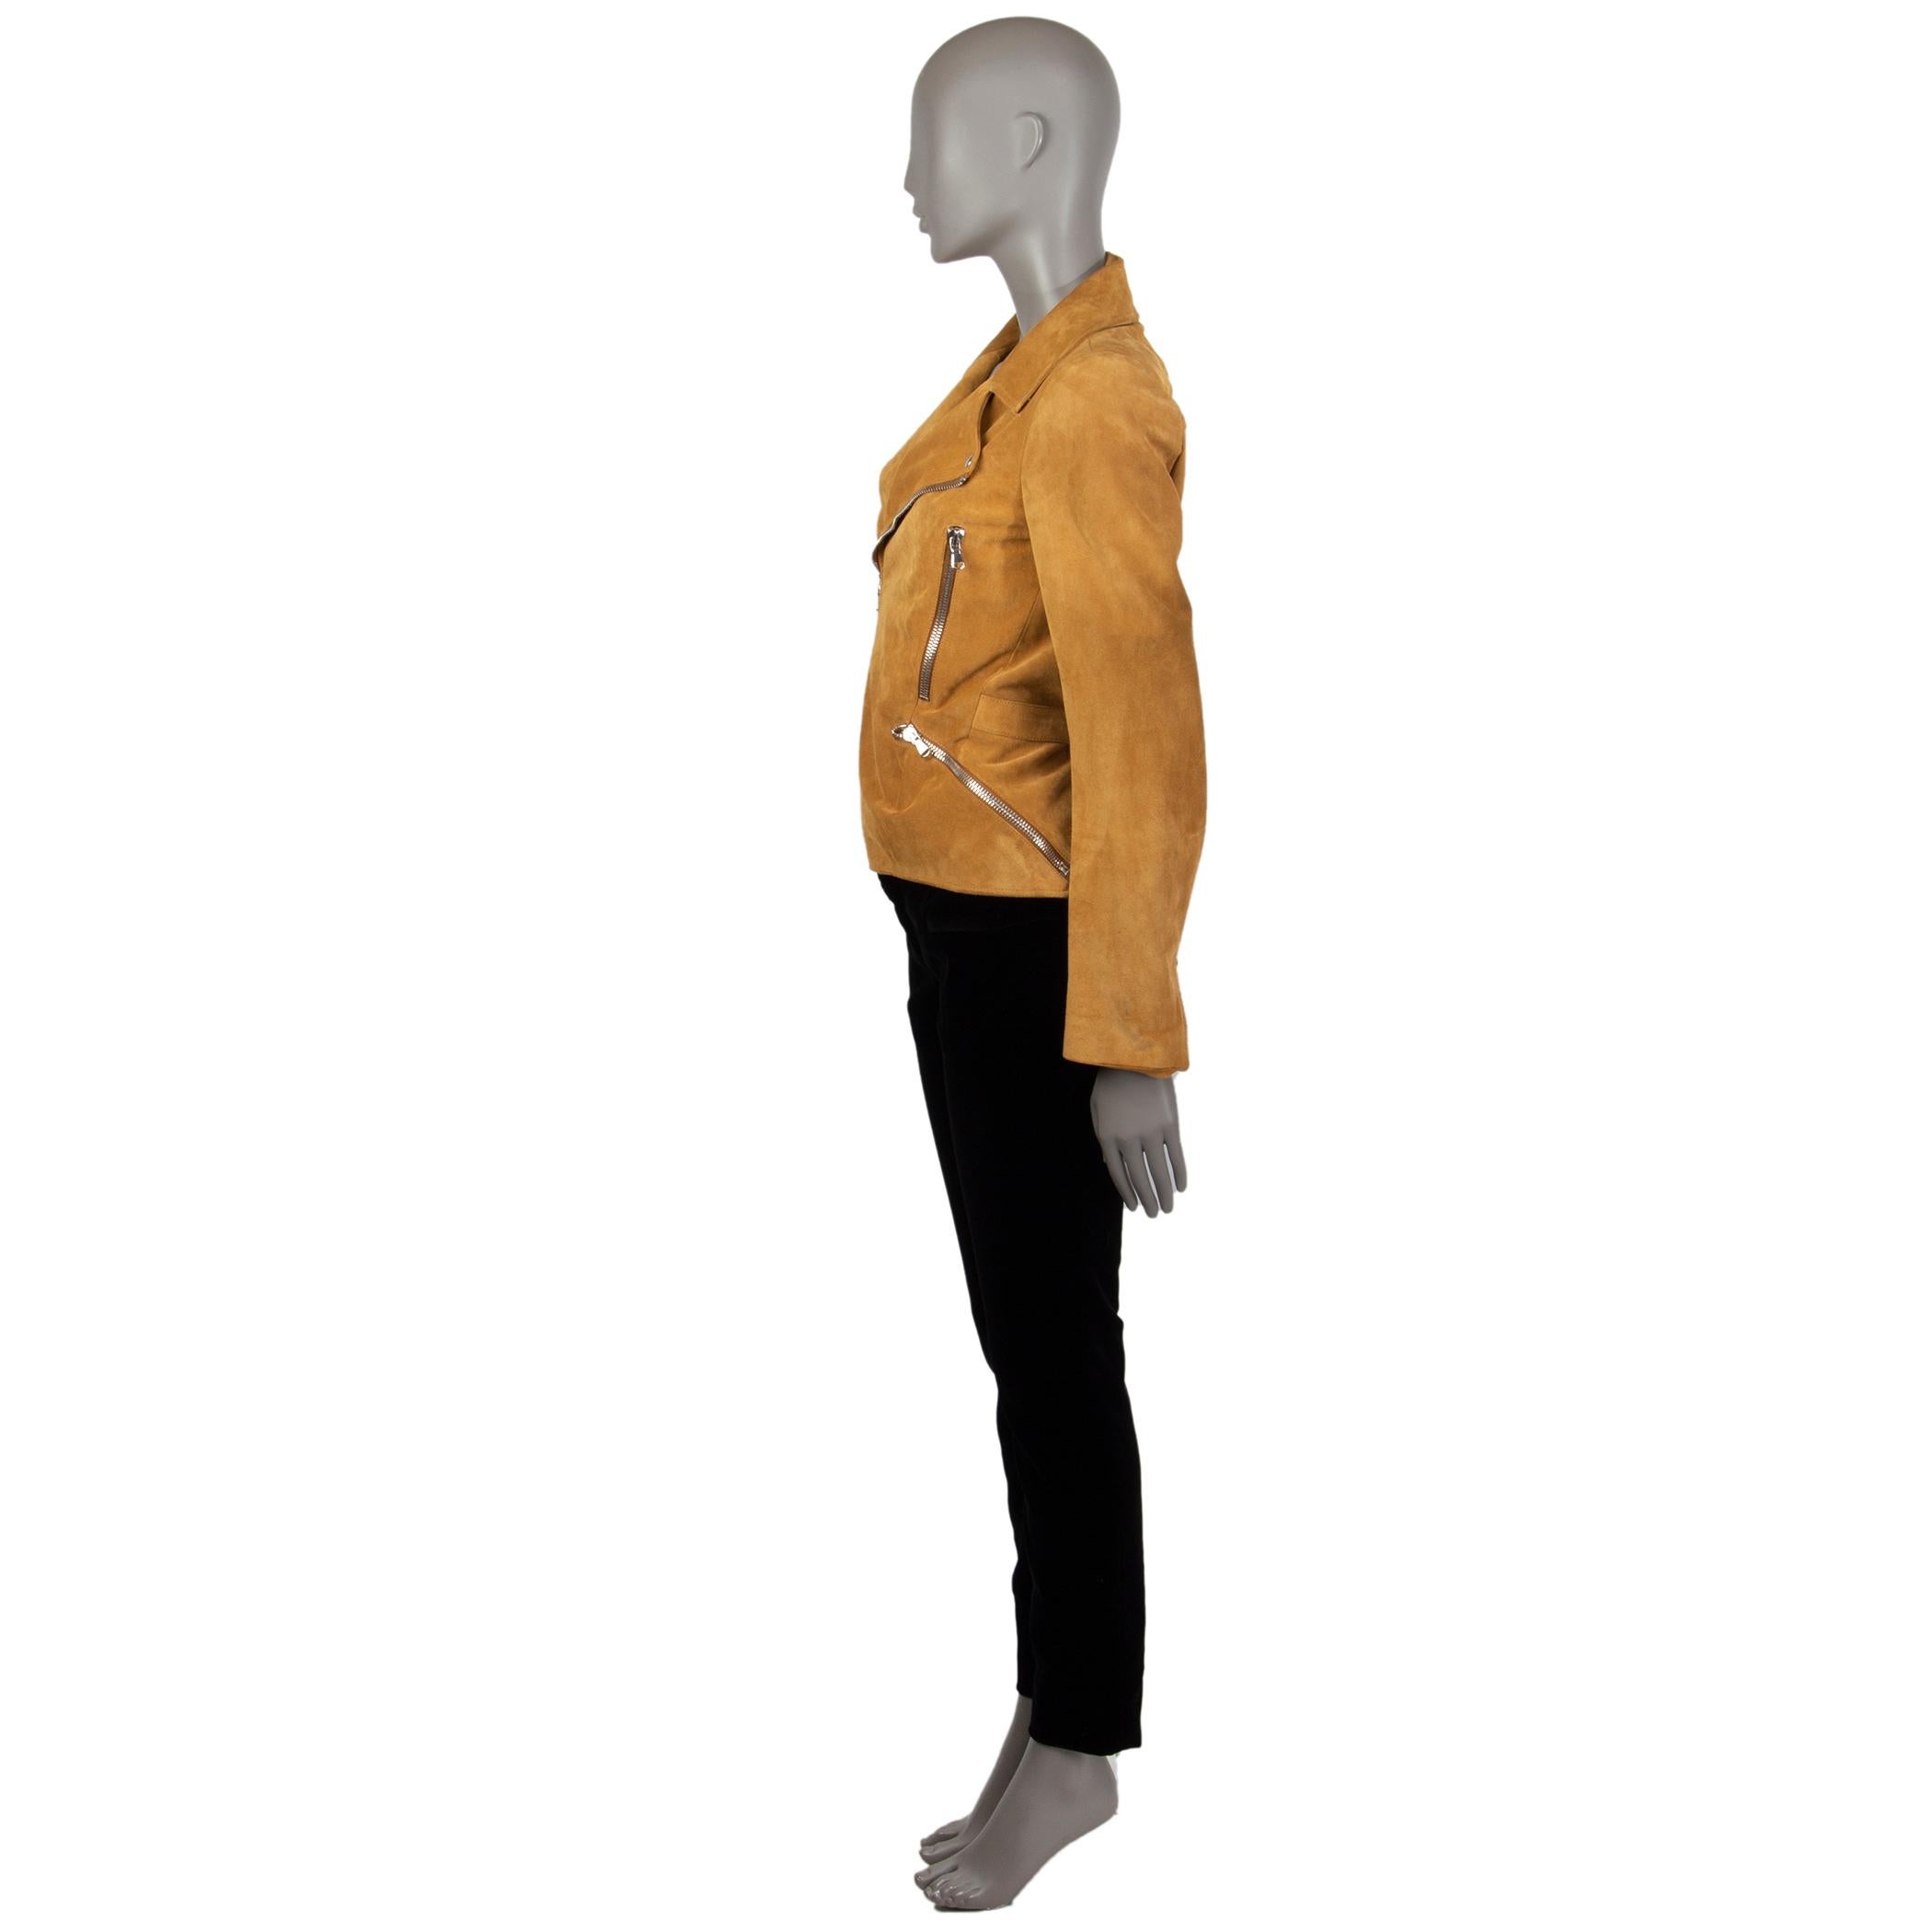 Alexander McQueen suede biker jacket in mustard suede with a notch collar and an attached belt on the back. Has two vertical and two asymmentrical pockets with a silver tone zipper on the front. Lined in silk (100%). There are some hardly noticeable